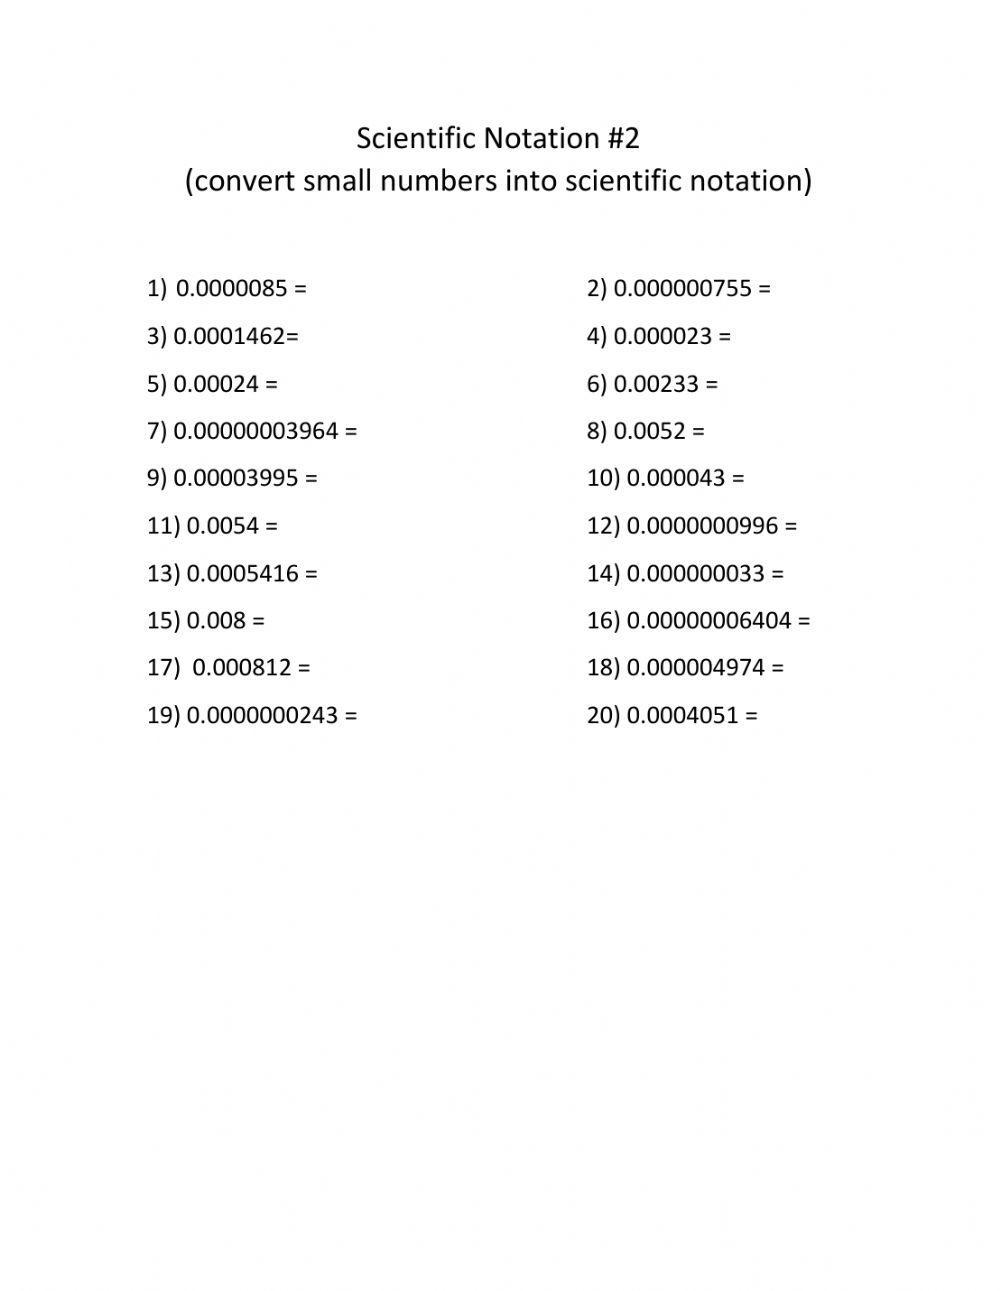 Scientific Notation -1 (small numbers to scientific)